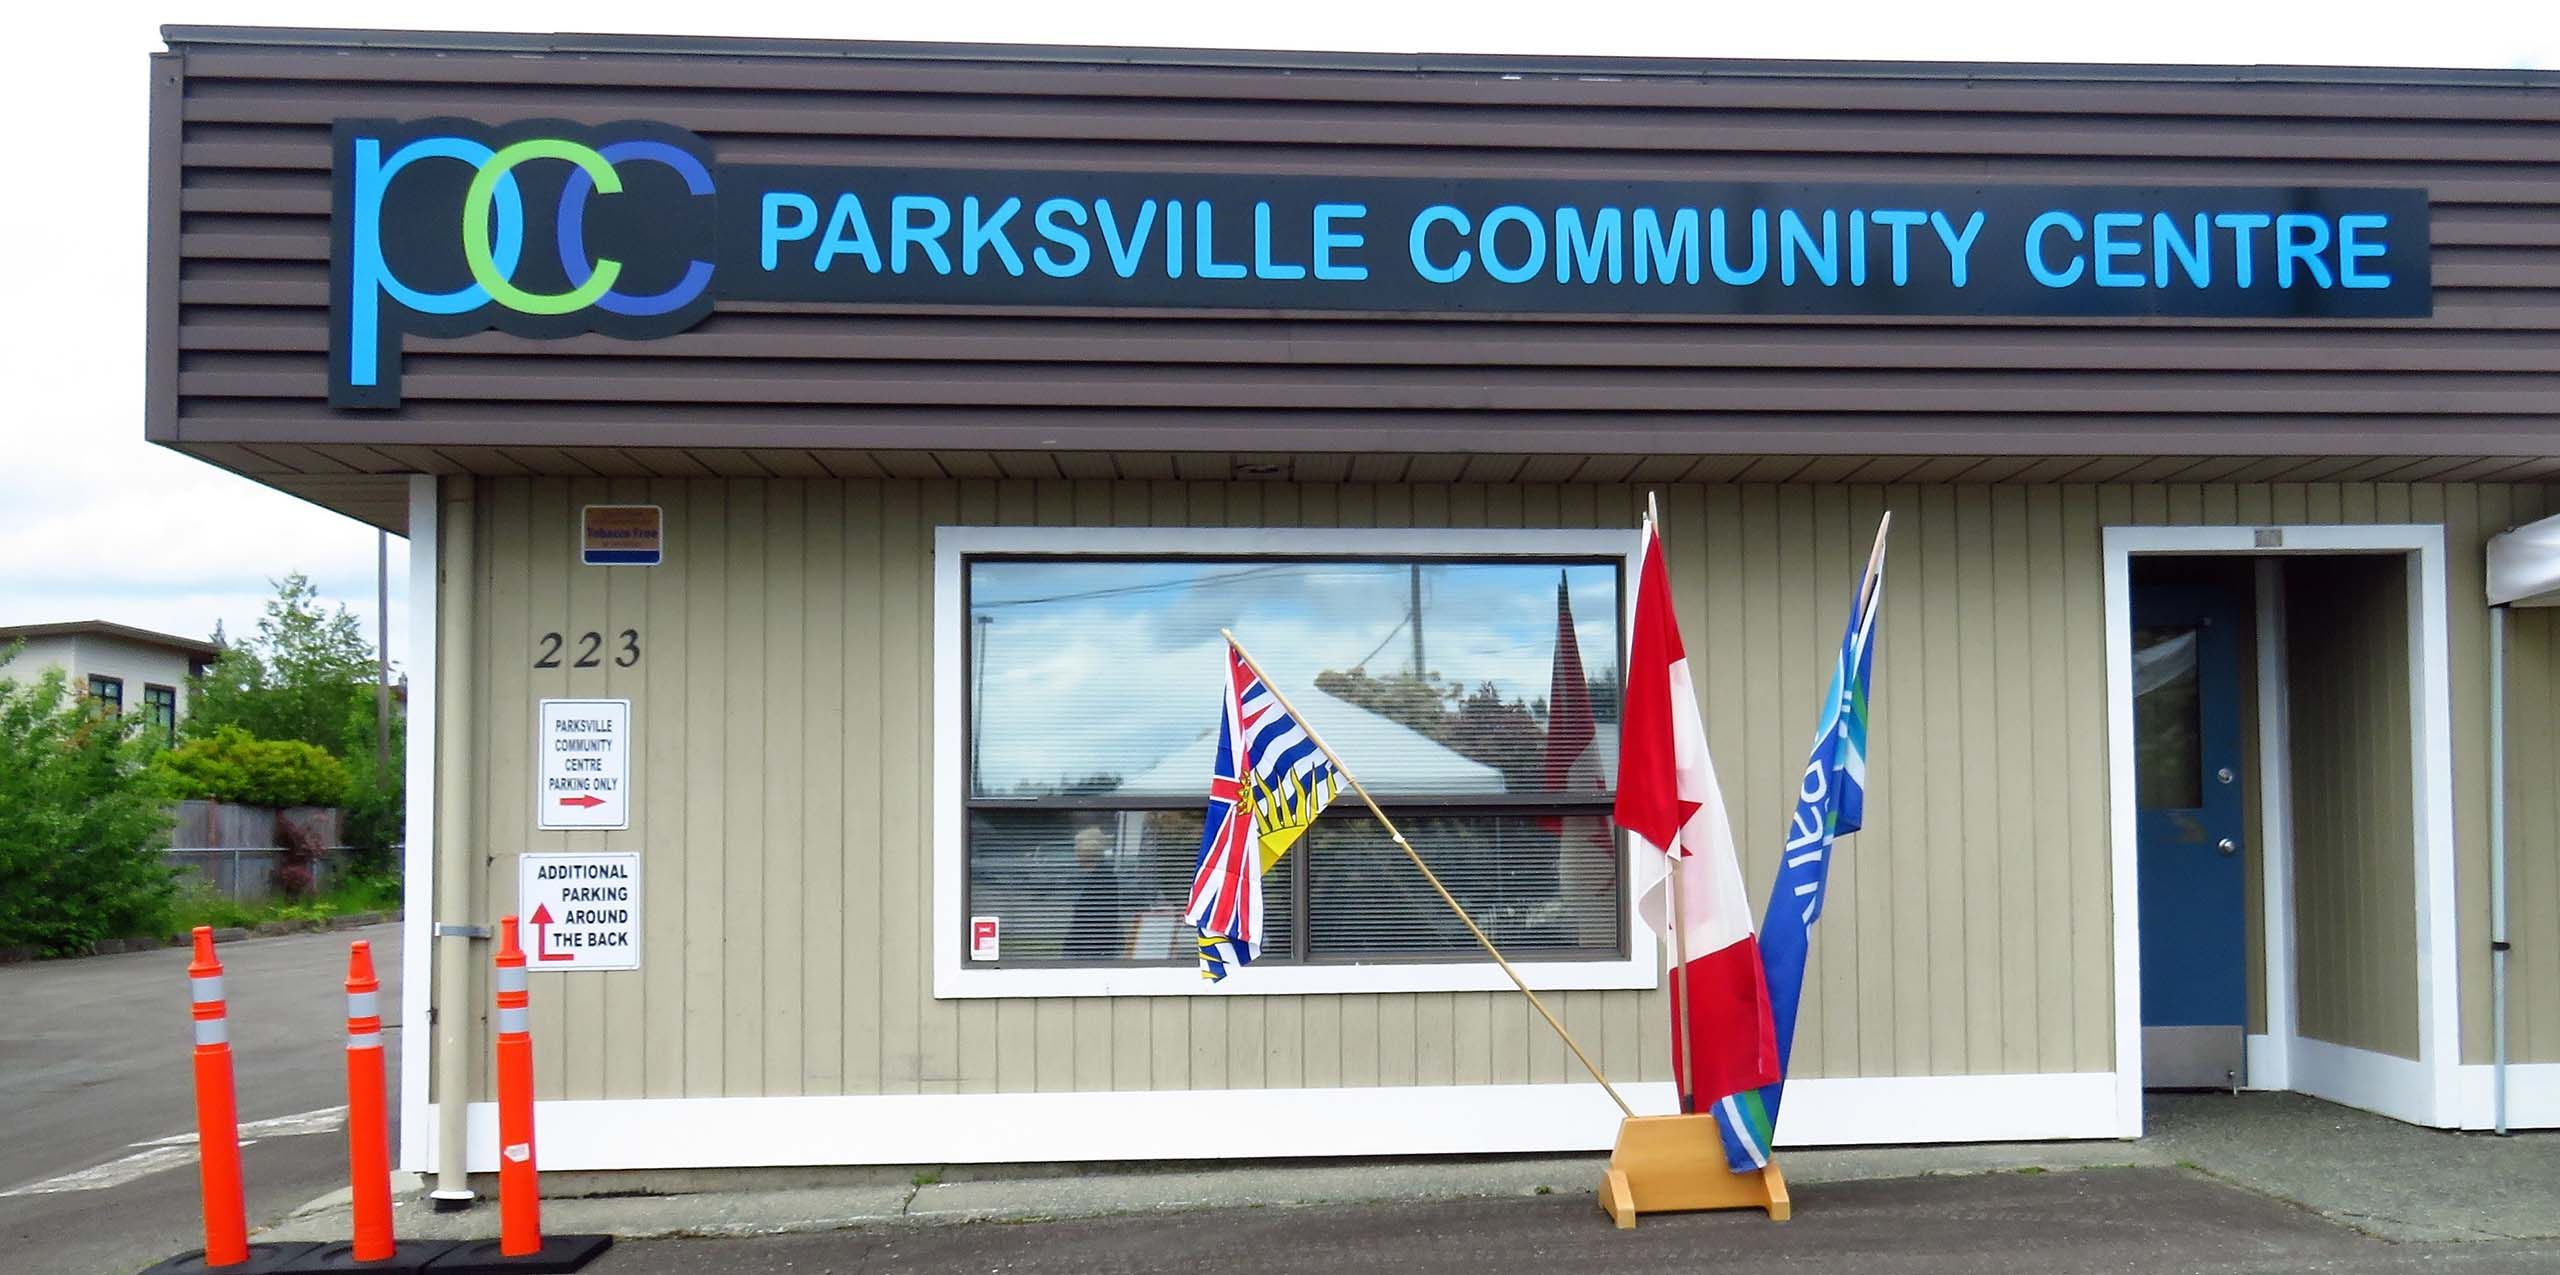 Parksville Community Centre signage with flags